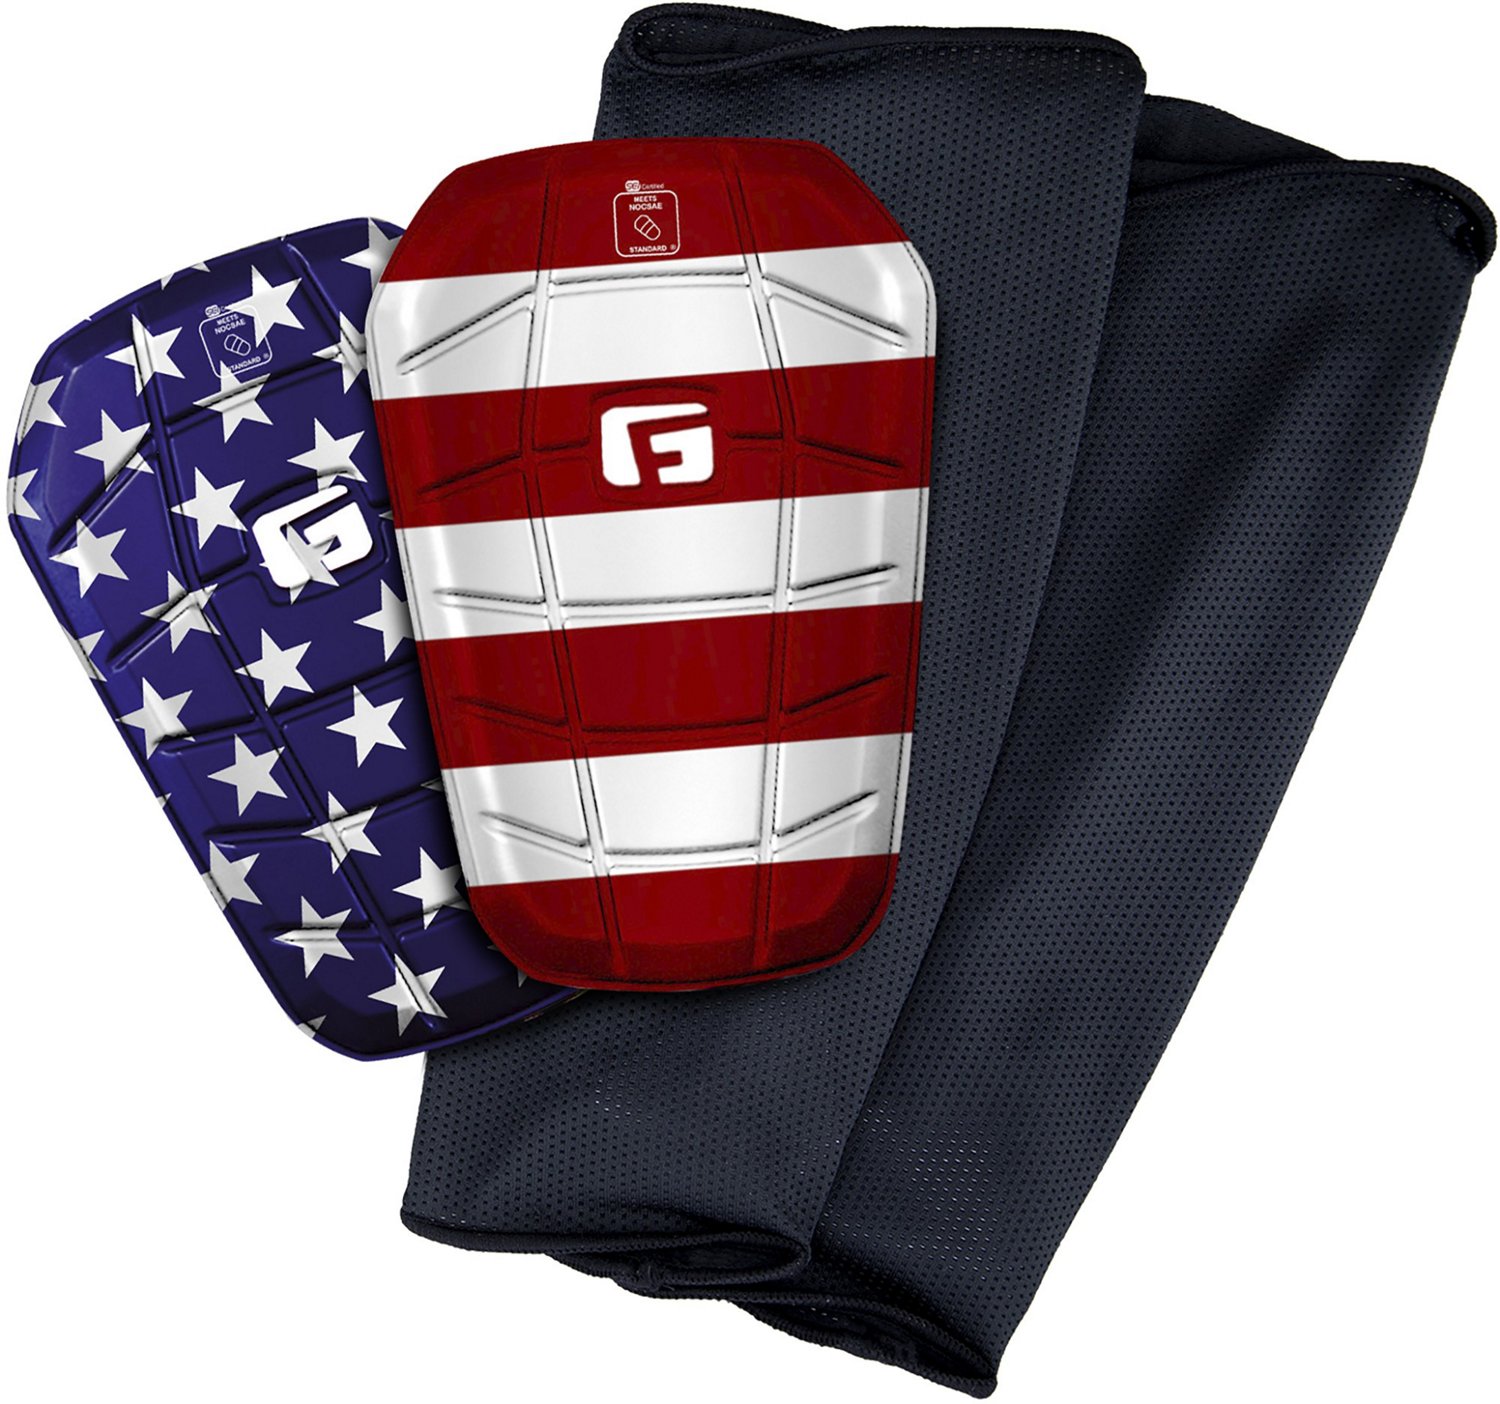 G-FORM Adults Pro-S Shin Guards